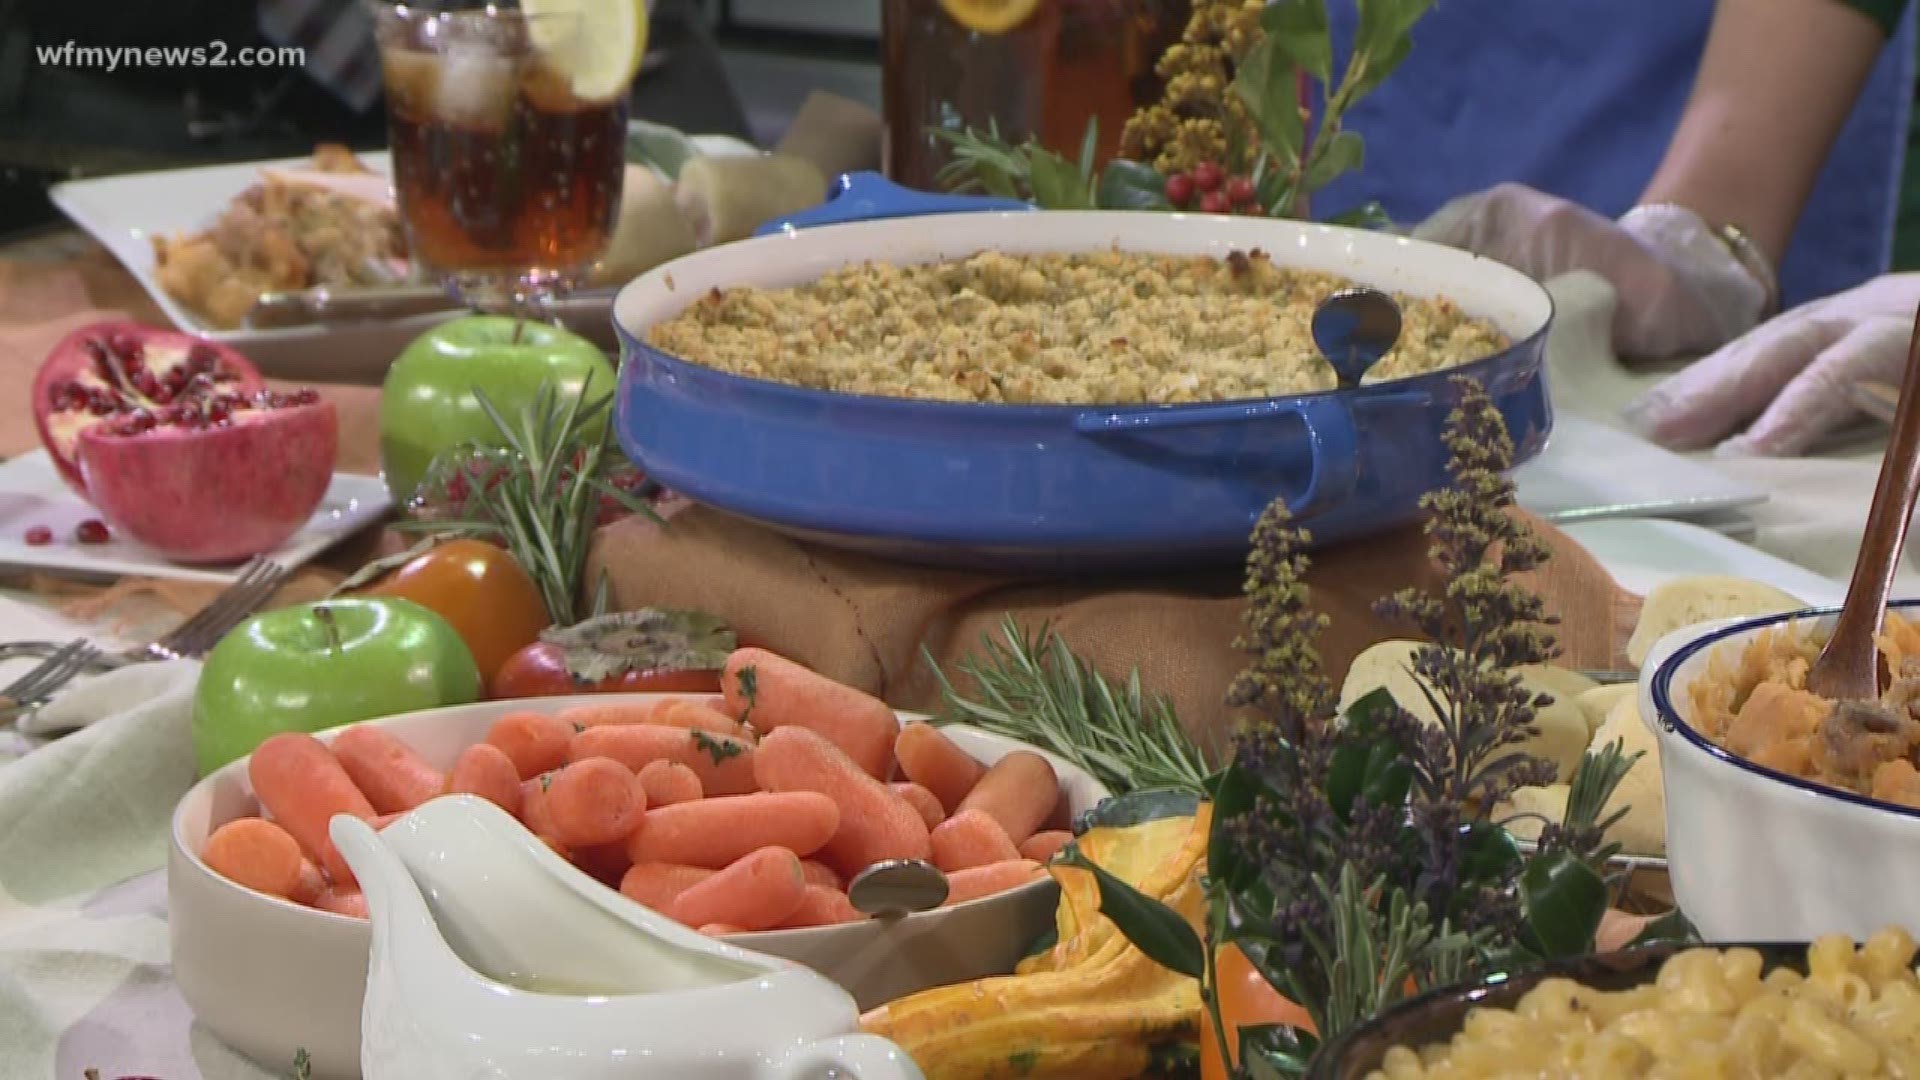 Cracker Barrel is back with a Thanksgiving spread that easy for you learn how to make.